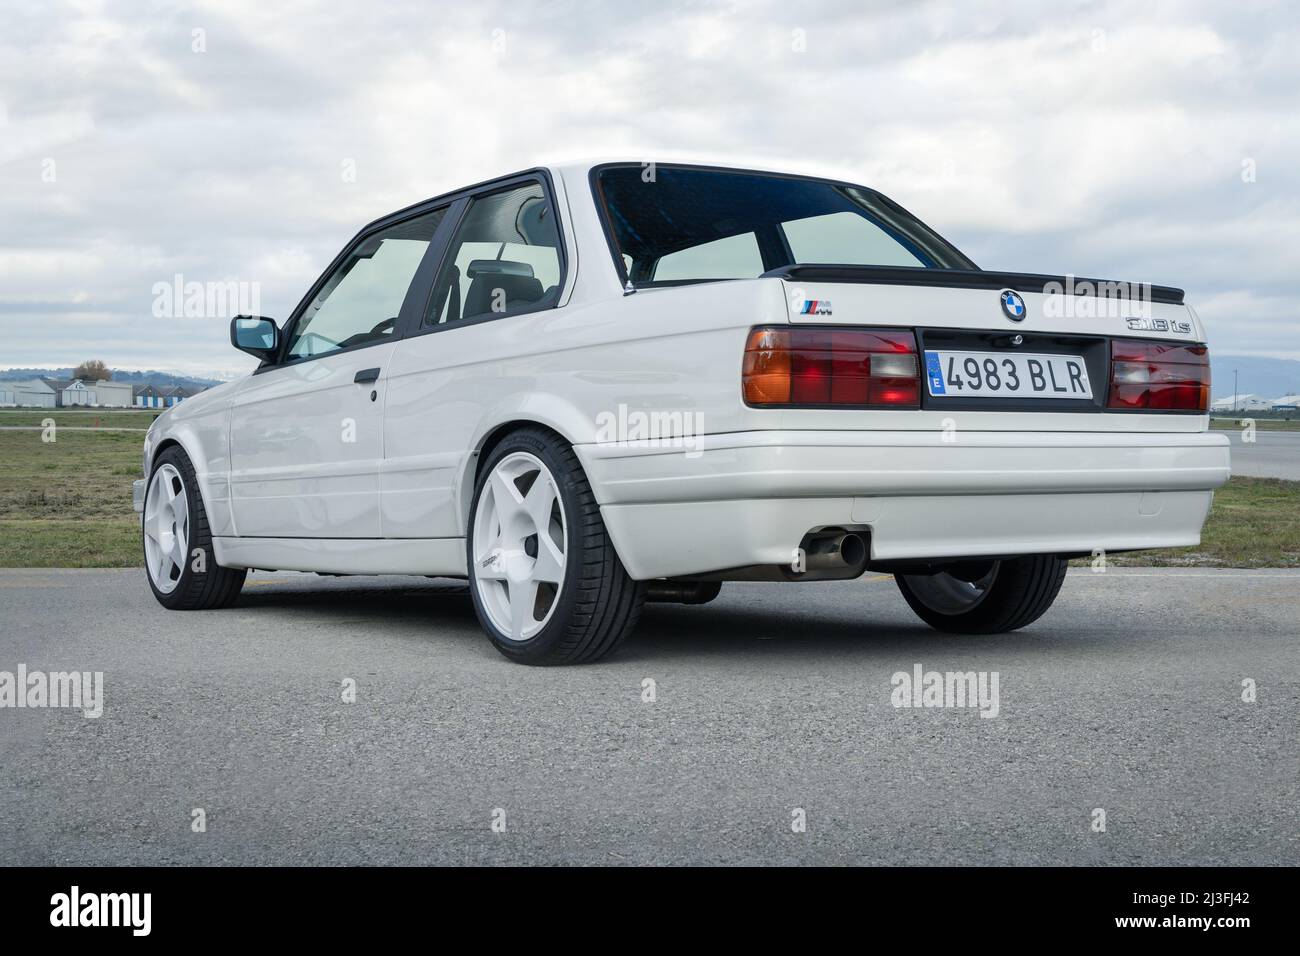 SABADELL, SPAIN-OCTOBER 9, 2021: BMW 318 is (E30) two-door sedan (second generation of BMW 3 Series), rear view Stock Photo